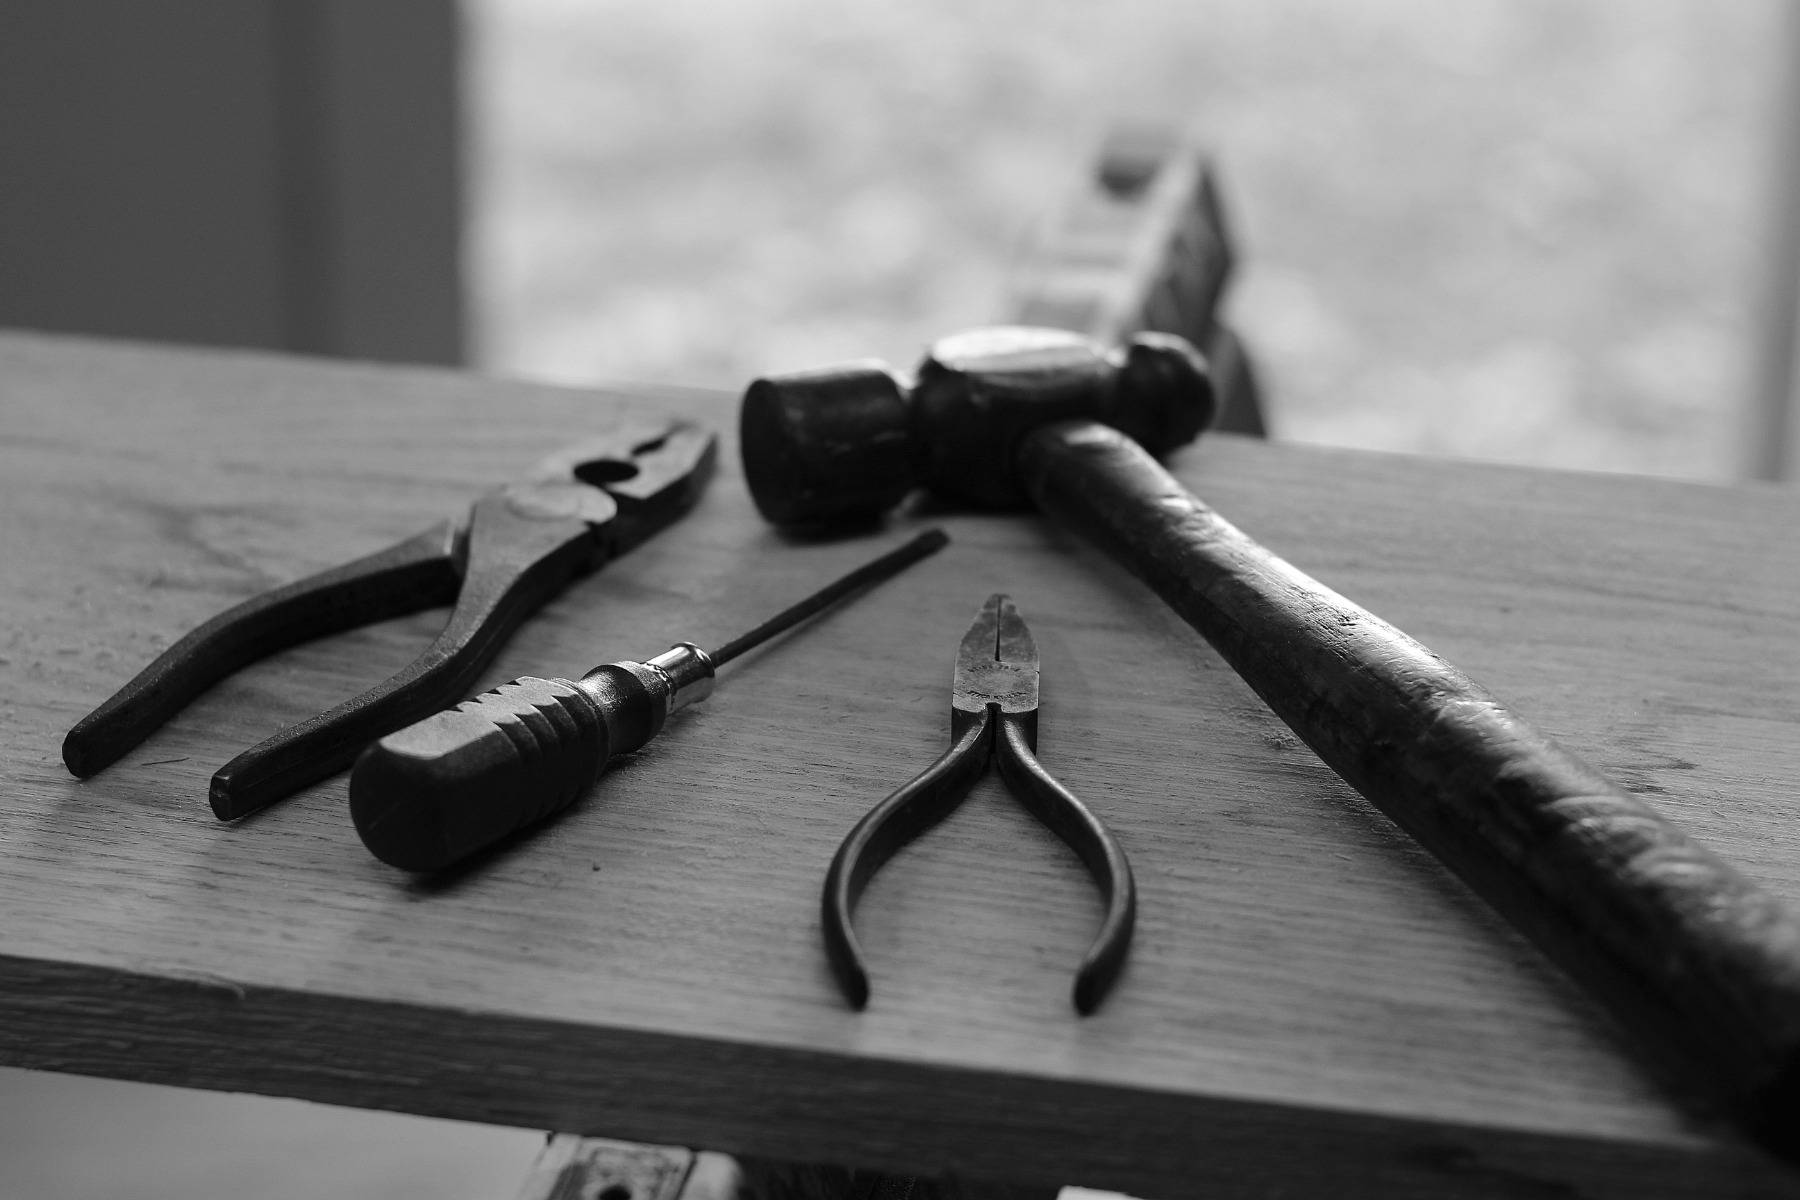 Photo of Tools by Hunter Haley on Unsplash